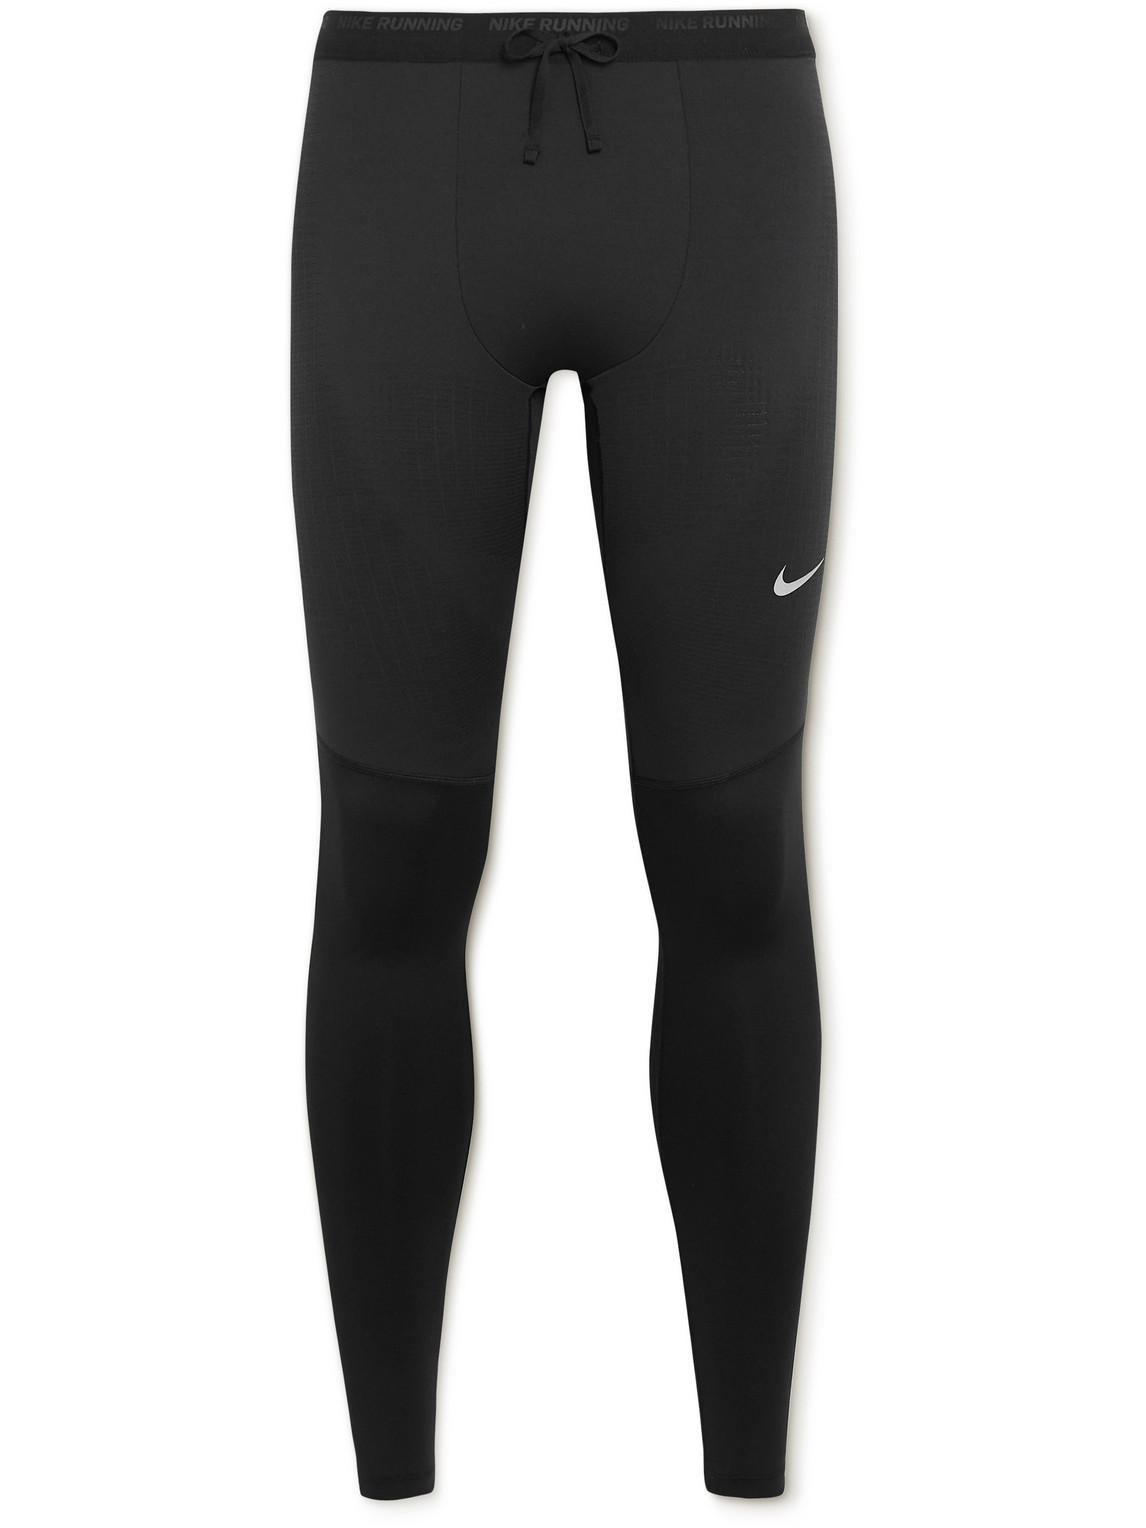 Nike Synthetic Phenom Elite Stretch-jersey Tights in Black for Men - Lyst